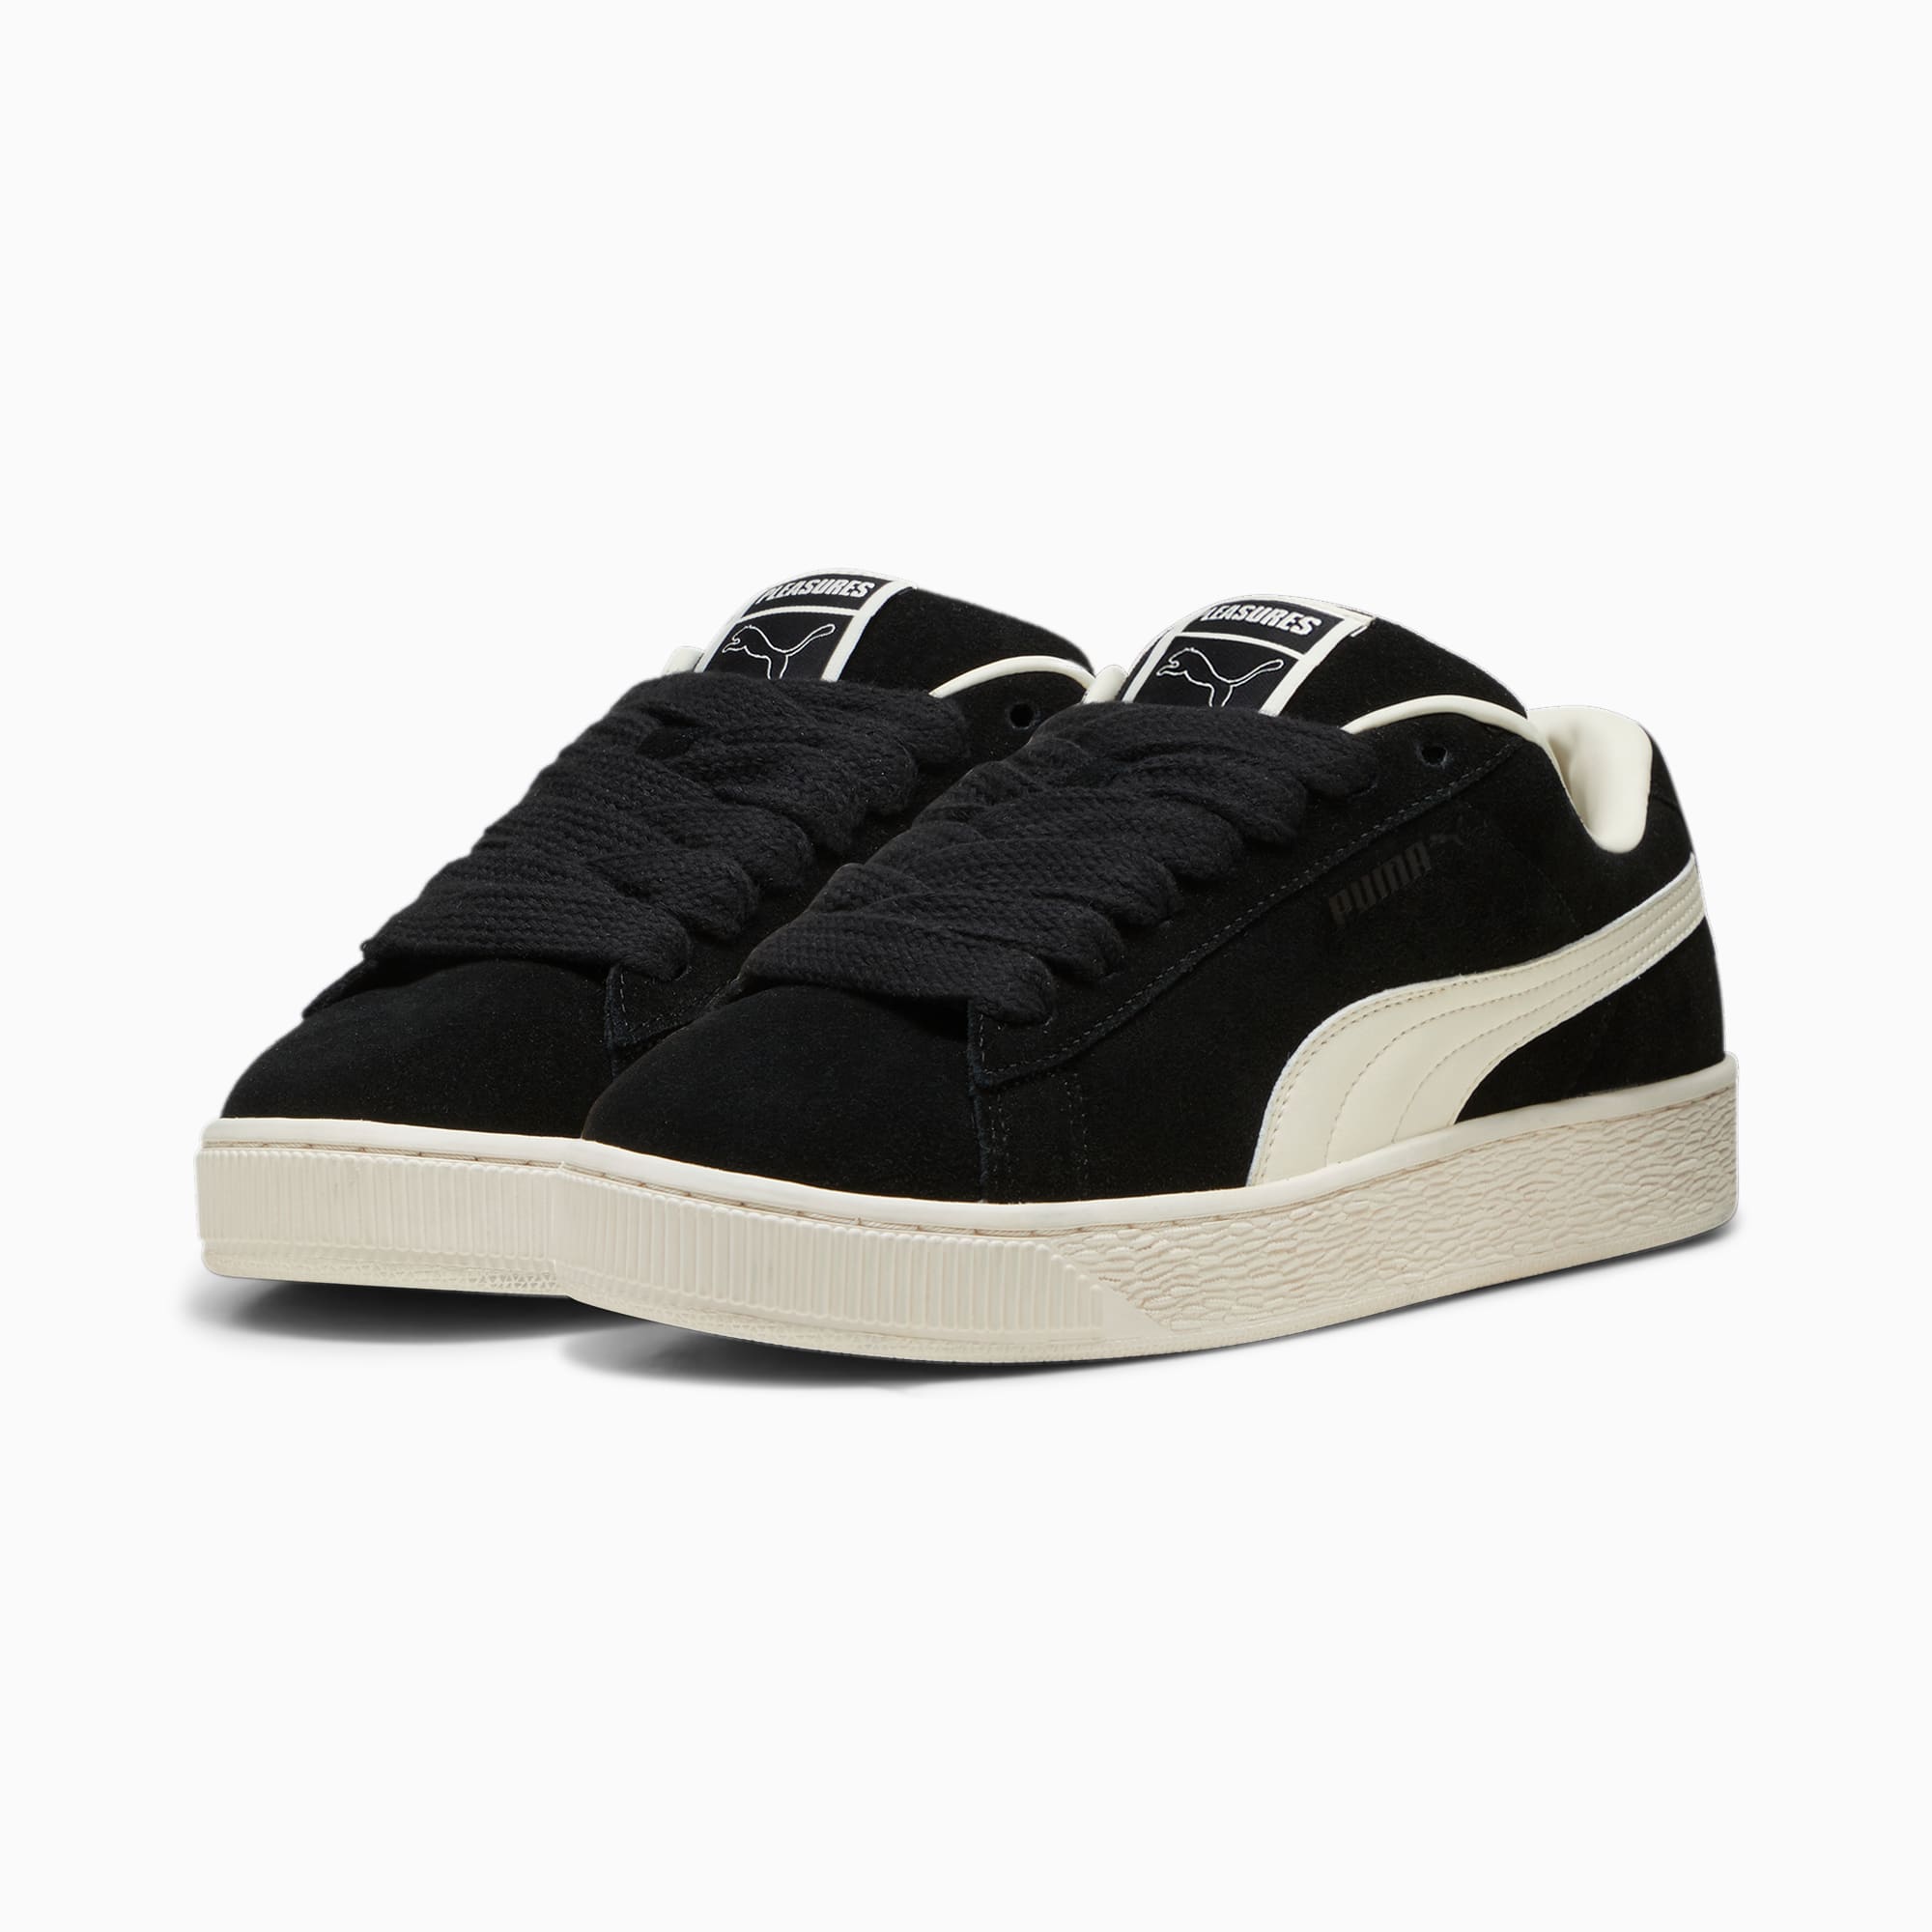 Women's PUMA X Pleasures Suede Xl Sneakers, Black/Frosted Ivory, Size 39, Shoes